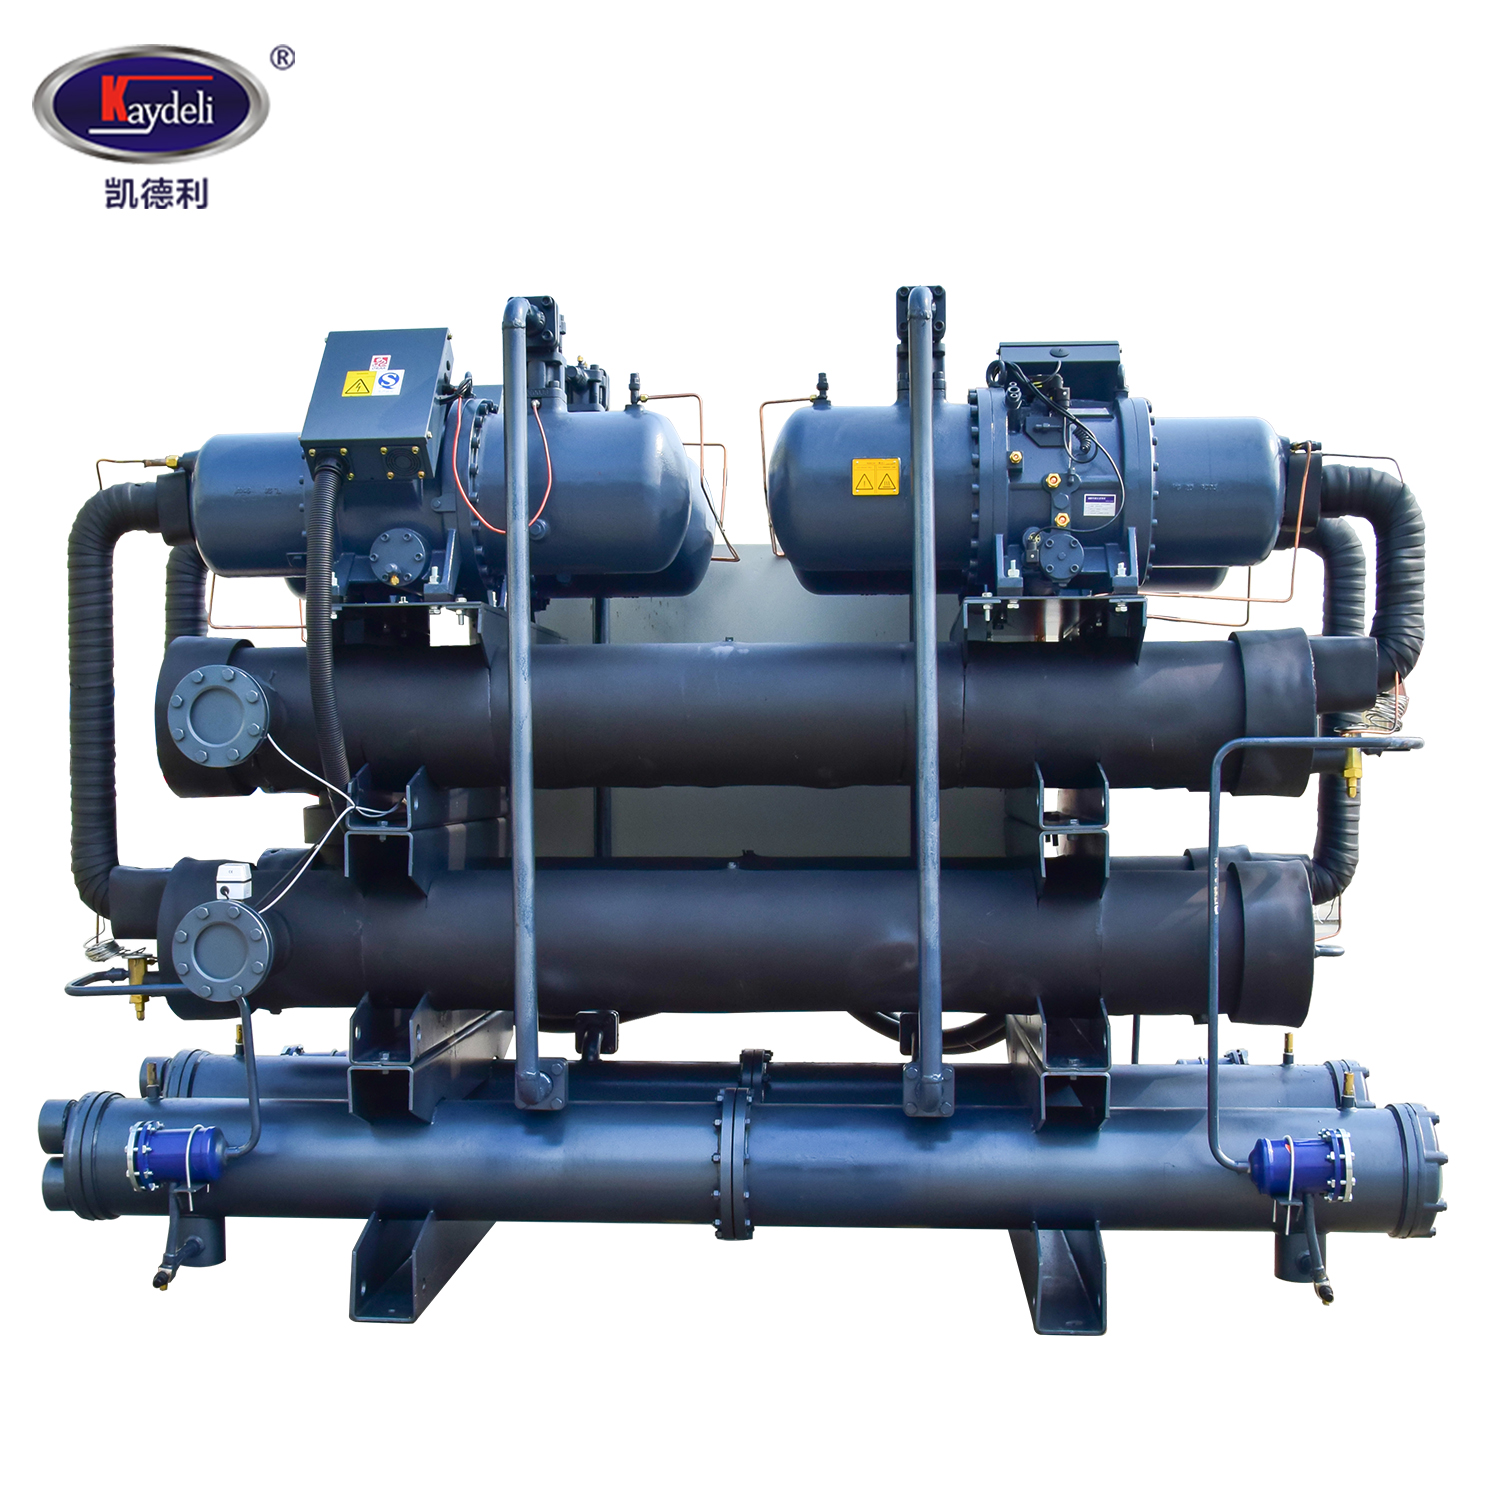 560hp 450ton 460Rt Water Cooled Screw Chiller Specification Chiller For Air Compressor In Hvac